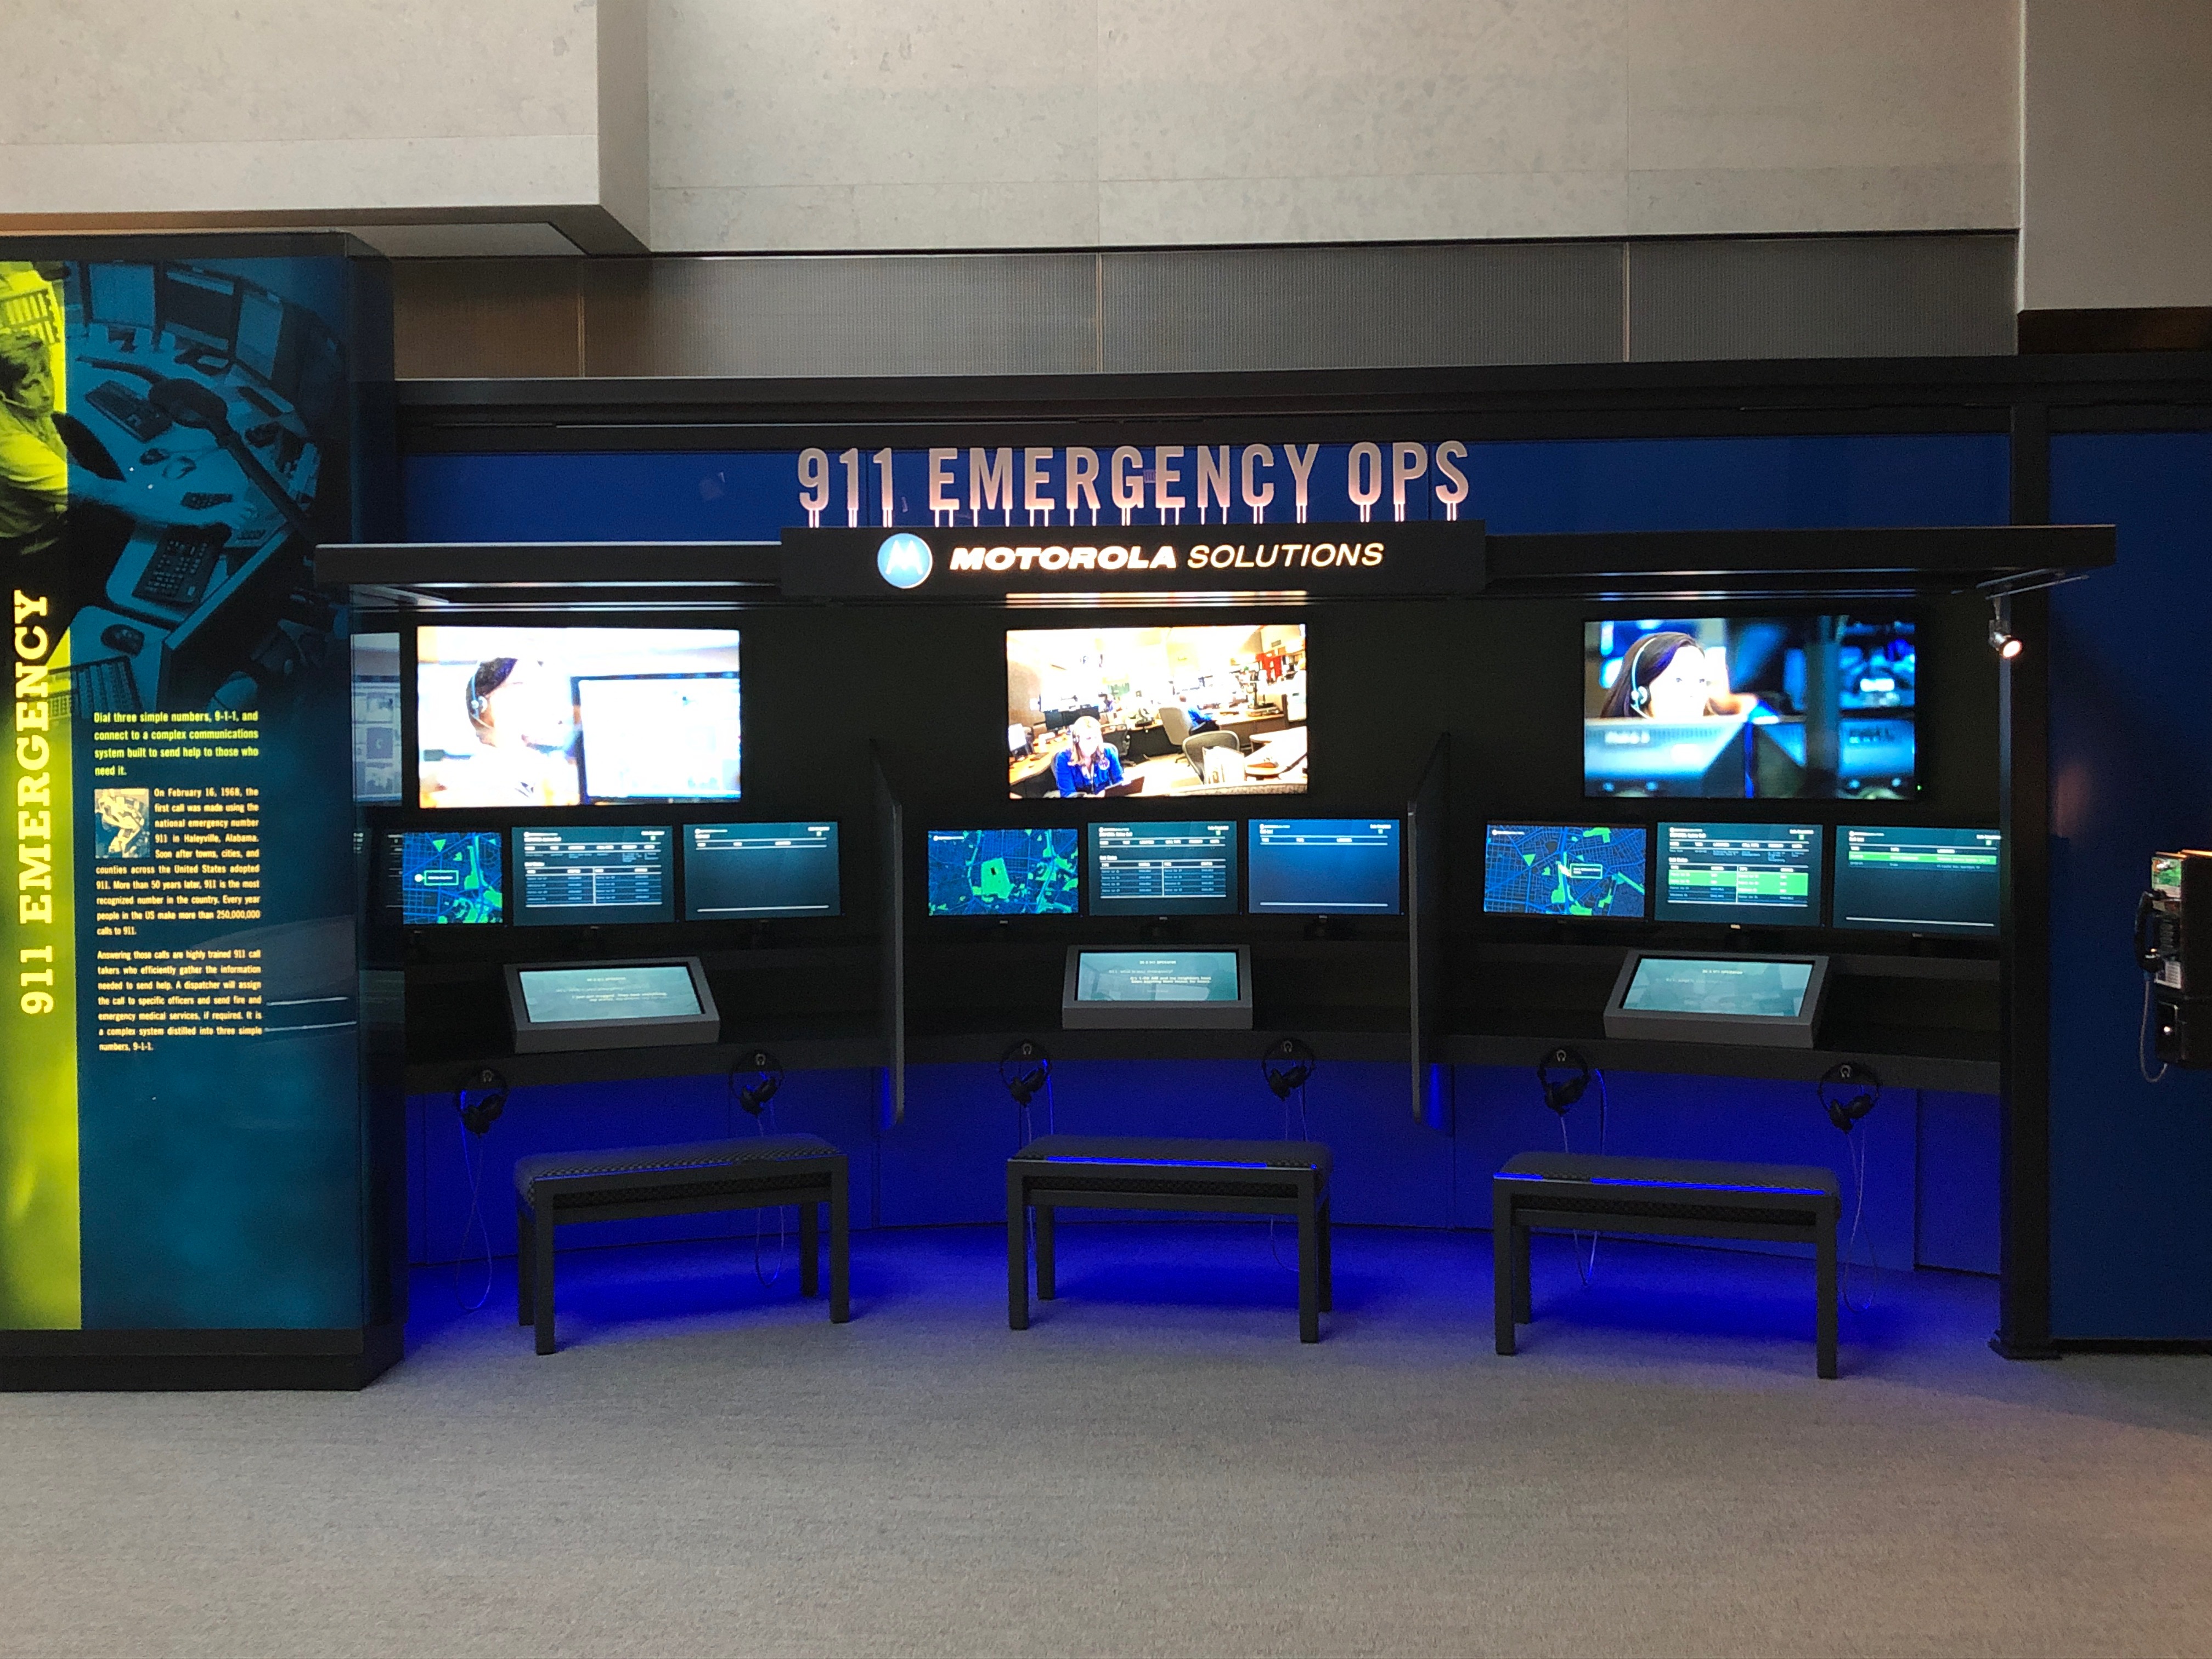 The 911 emergency opps exhibit at the NLEM